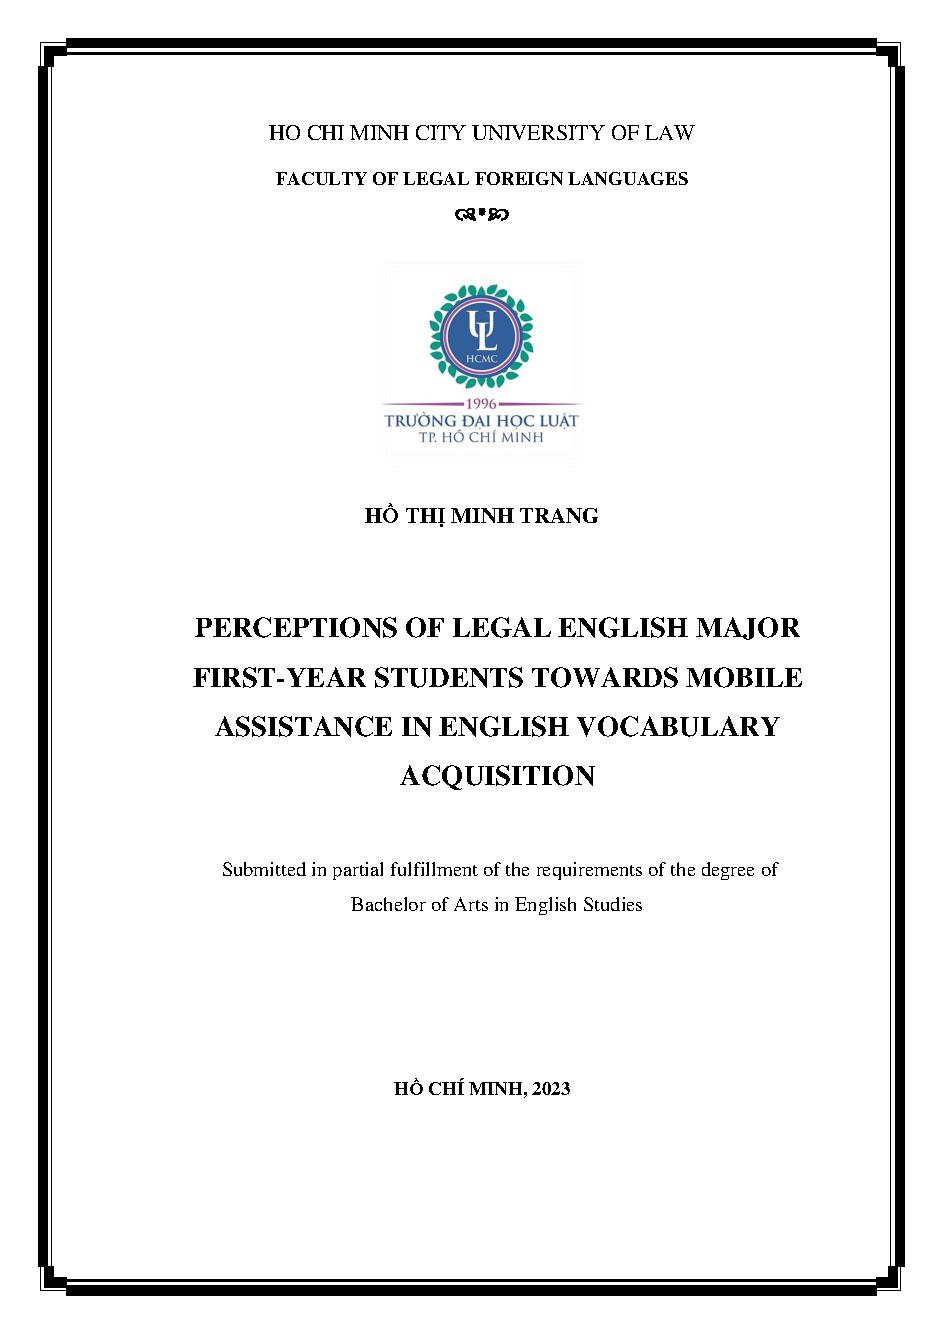 Legal English students’ perceptions towards mobile learning in vocabulary acquisition